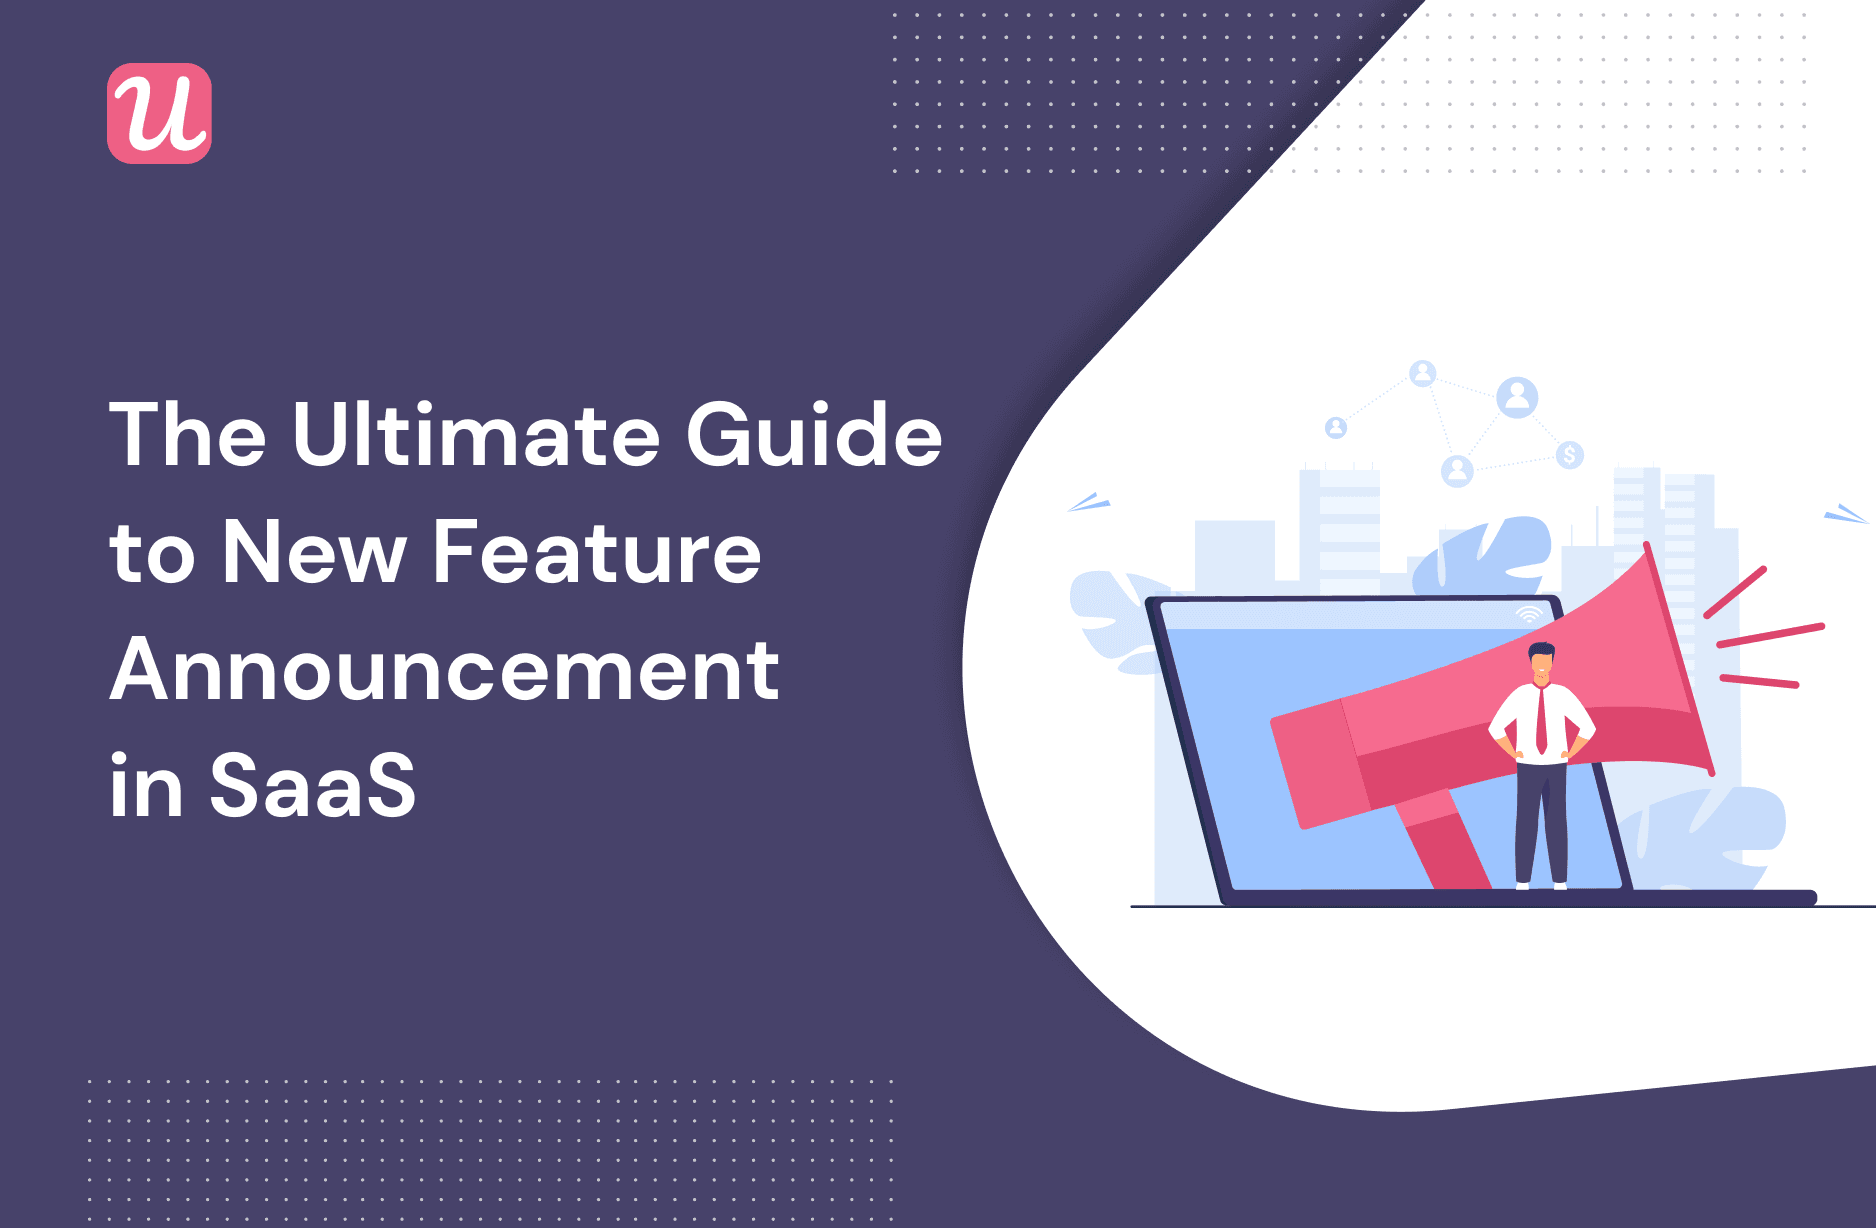 The Ultimate Guide To New Feature Announcement In SaaS